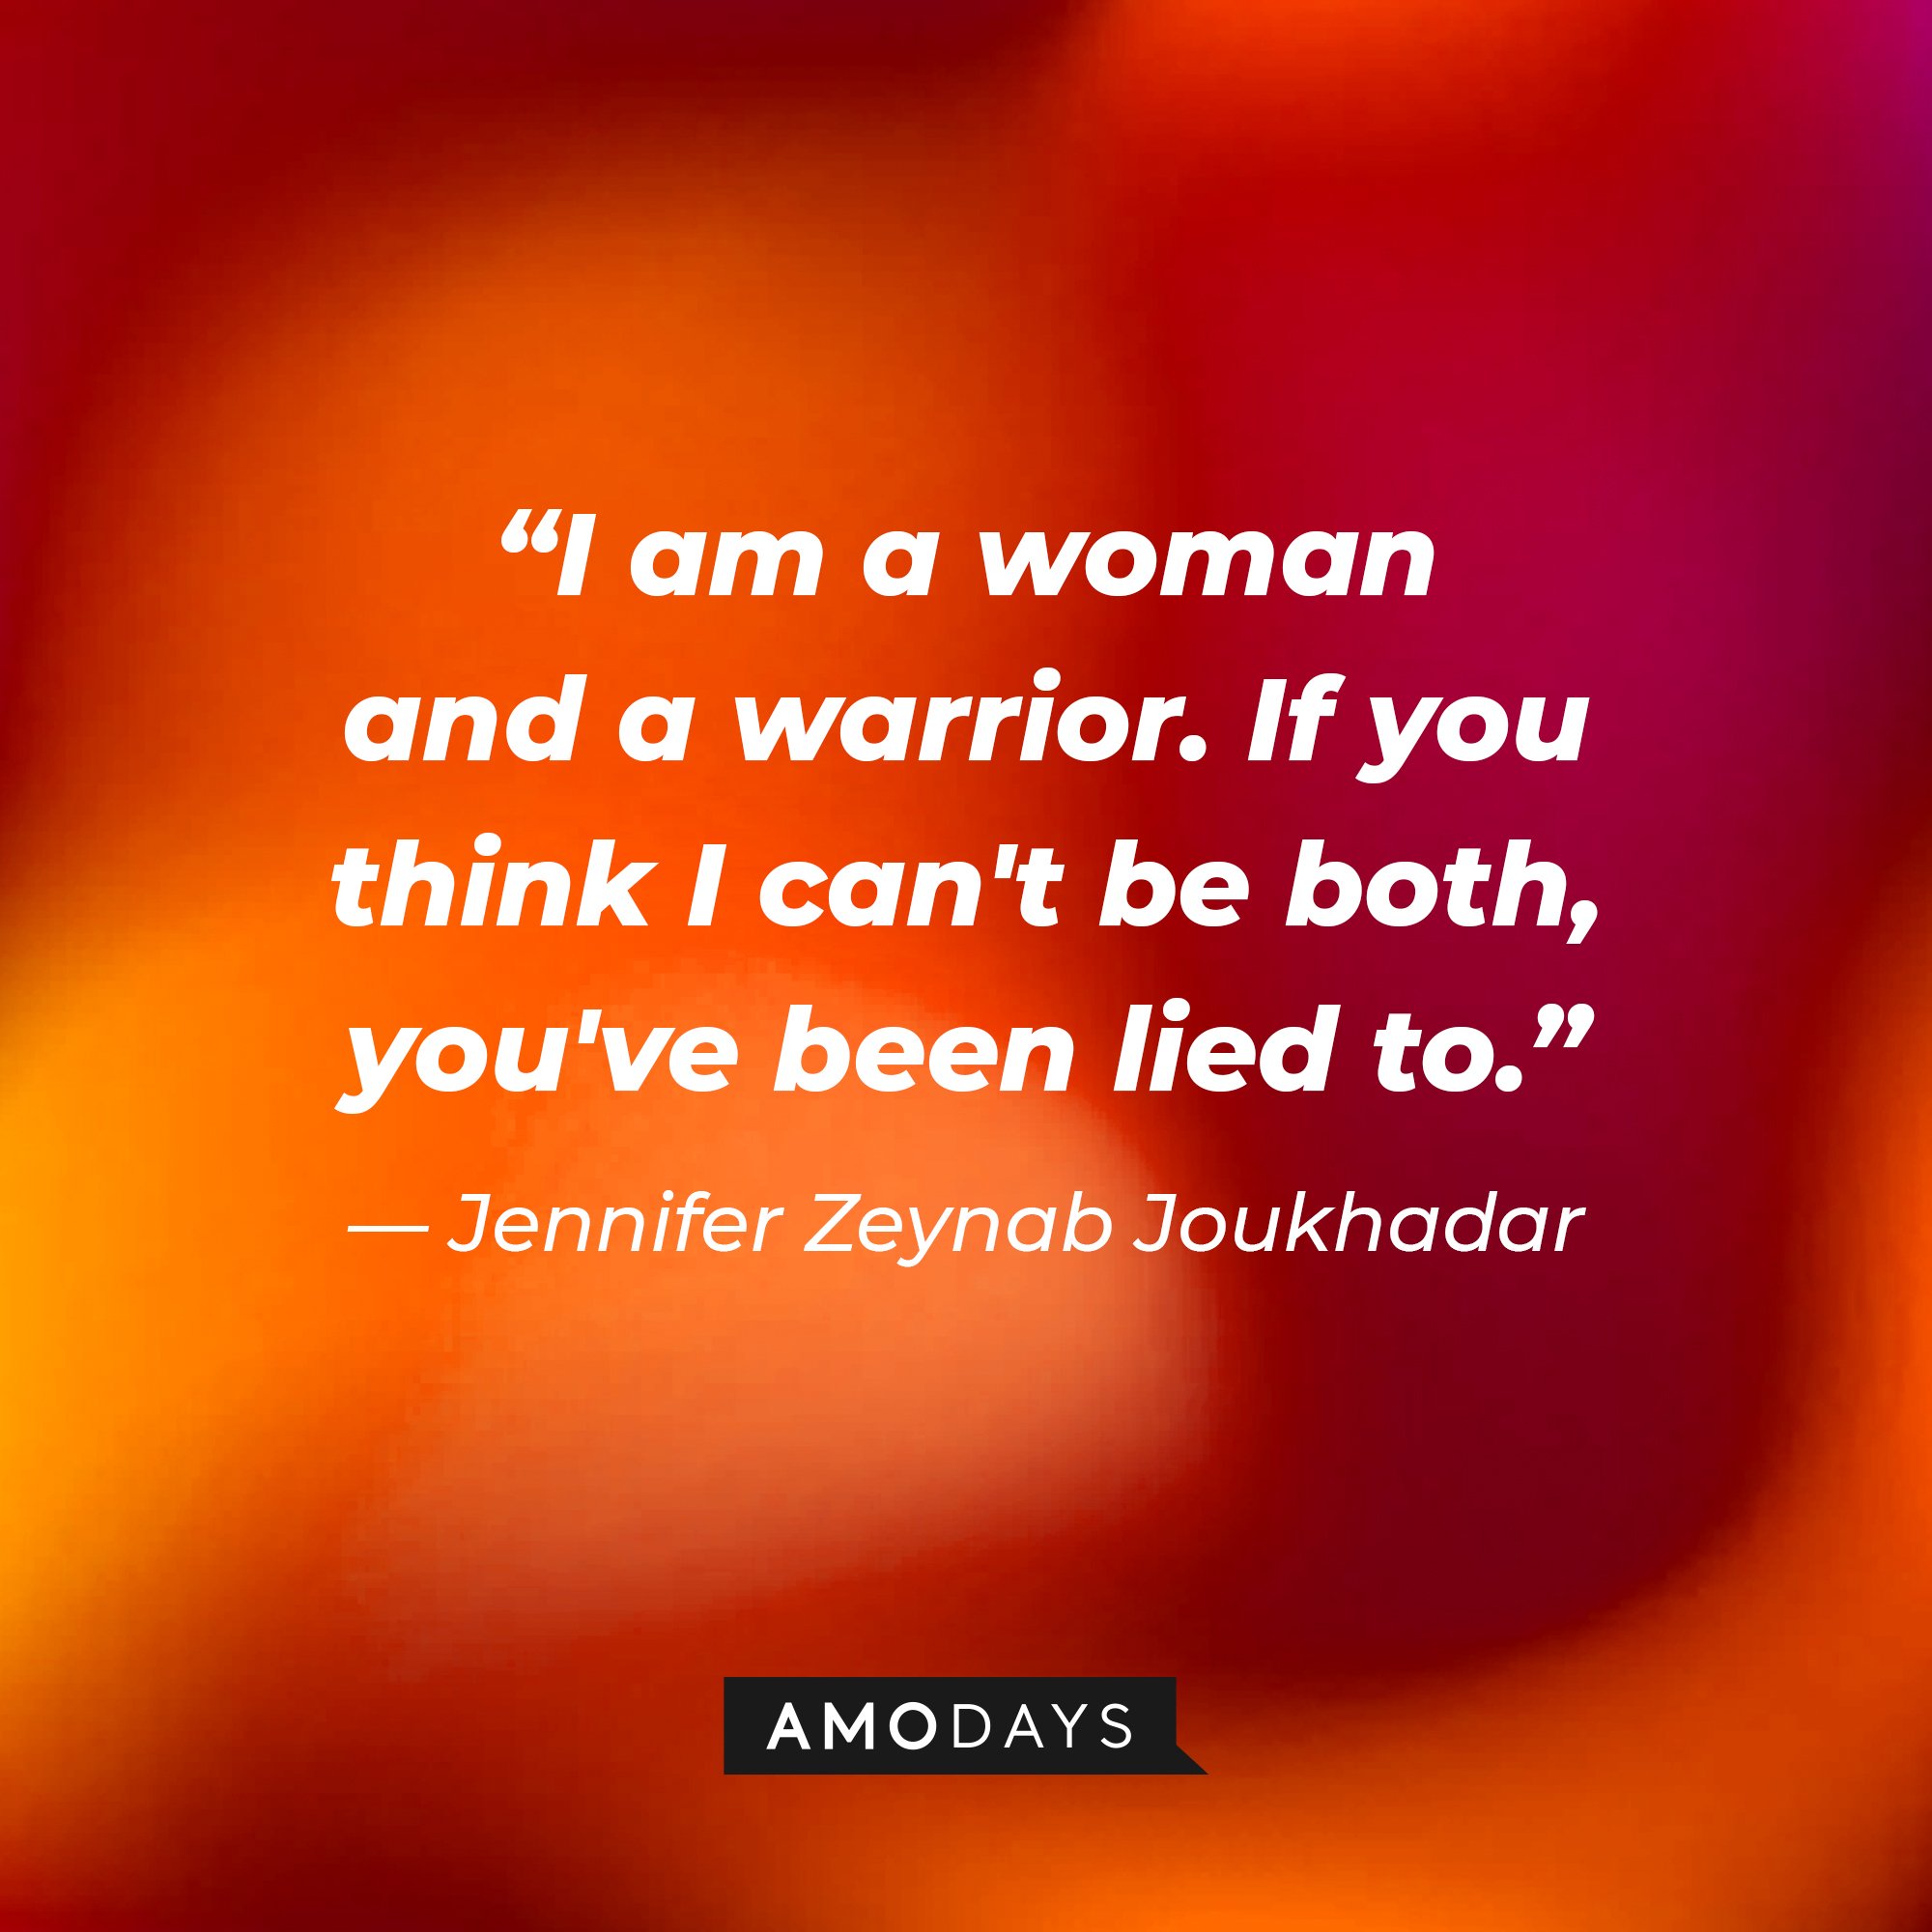  Jennifer Zeynab Joukhadar’s quote: "I am a woman and a warrior. If you think I can't be both, you've been lied to." | Image: AmoDays